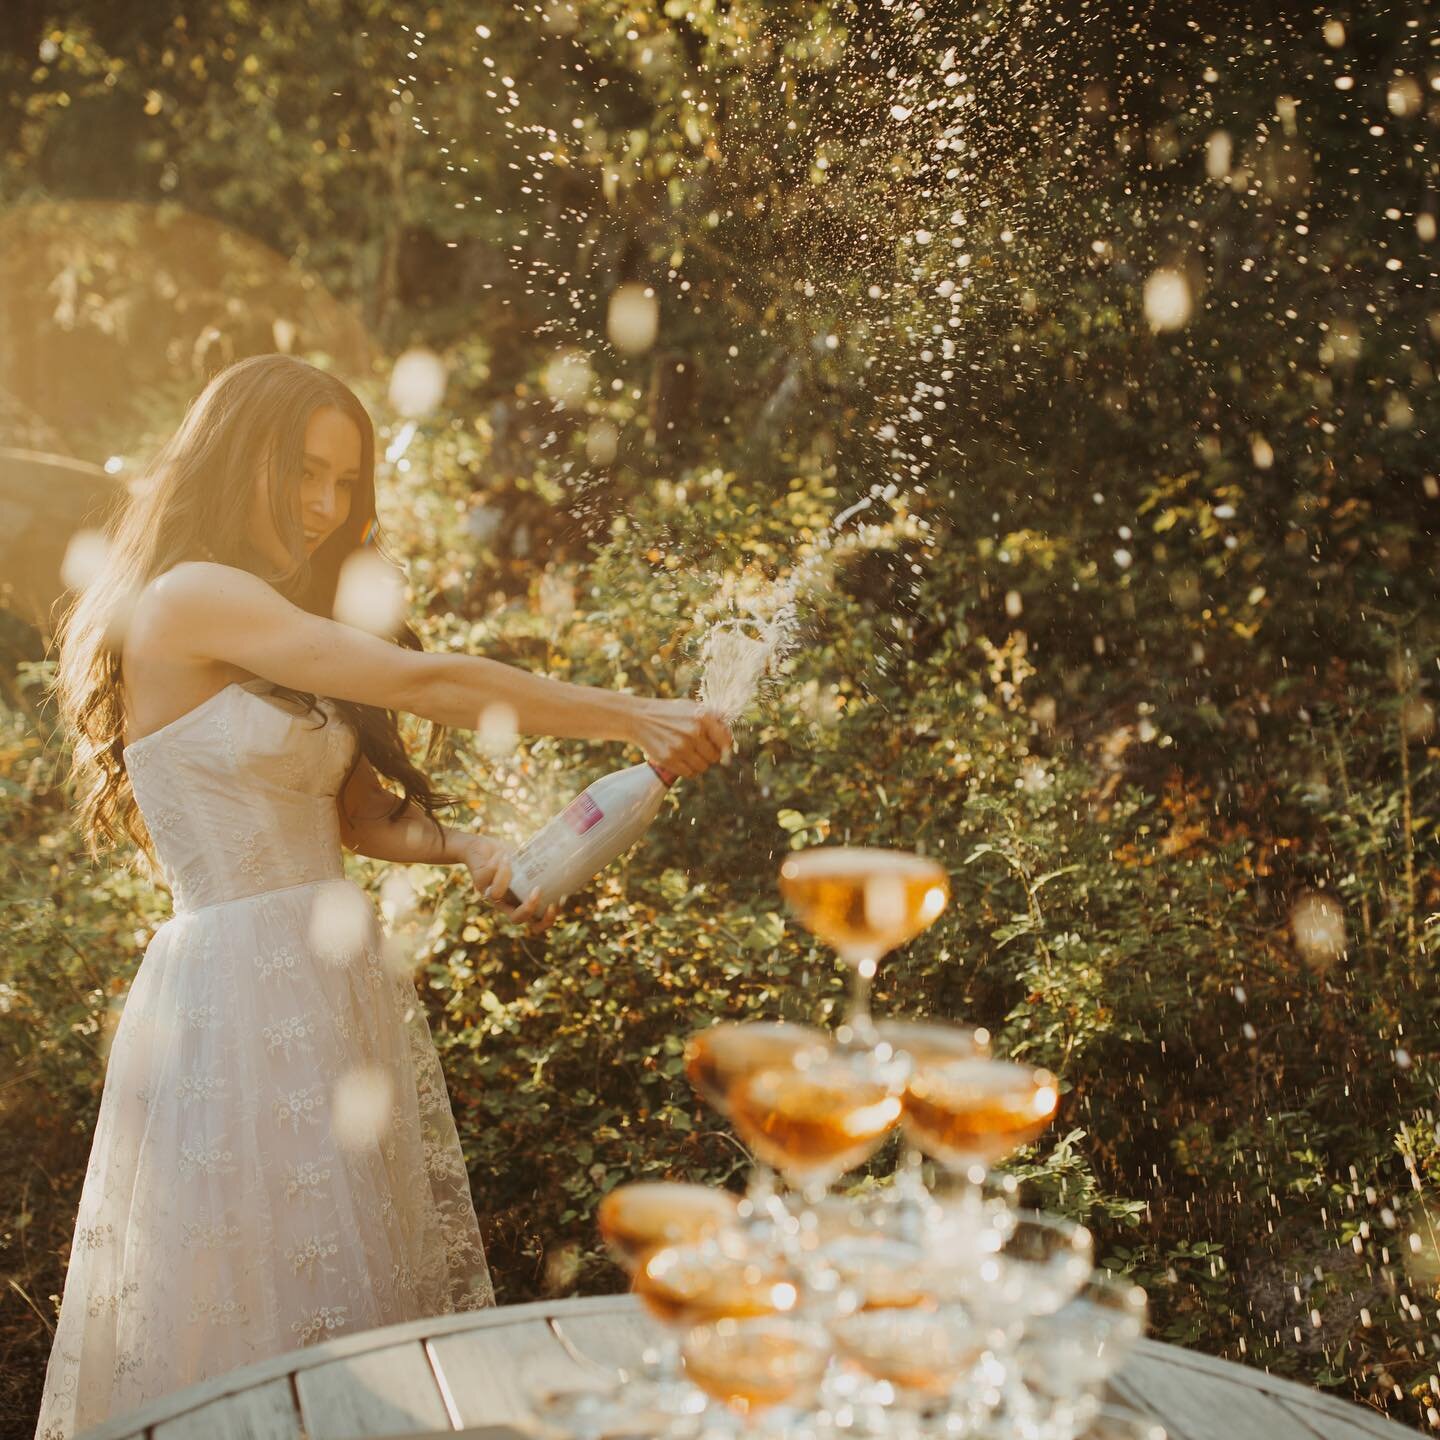 Feels cause &lsquo;tis the seasonnnnnnnn 🎄 is just around the corner!!!

oh and champagne tower is a MUST. 

I know I need to start sharing some wedding planning content for y&rsquo;all 😎 

#champagnetower #champagneshowers #bride #goldenlovestorie